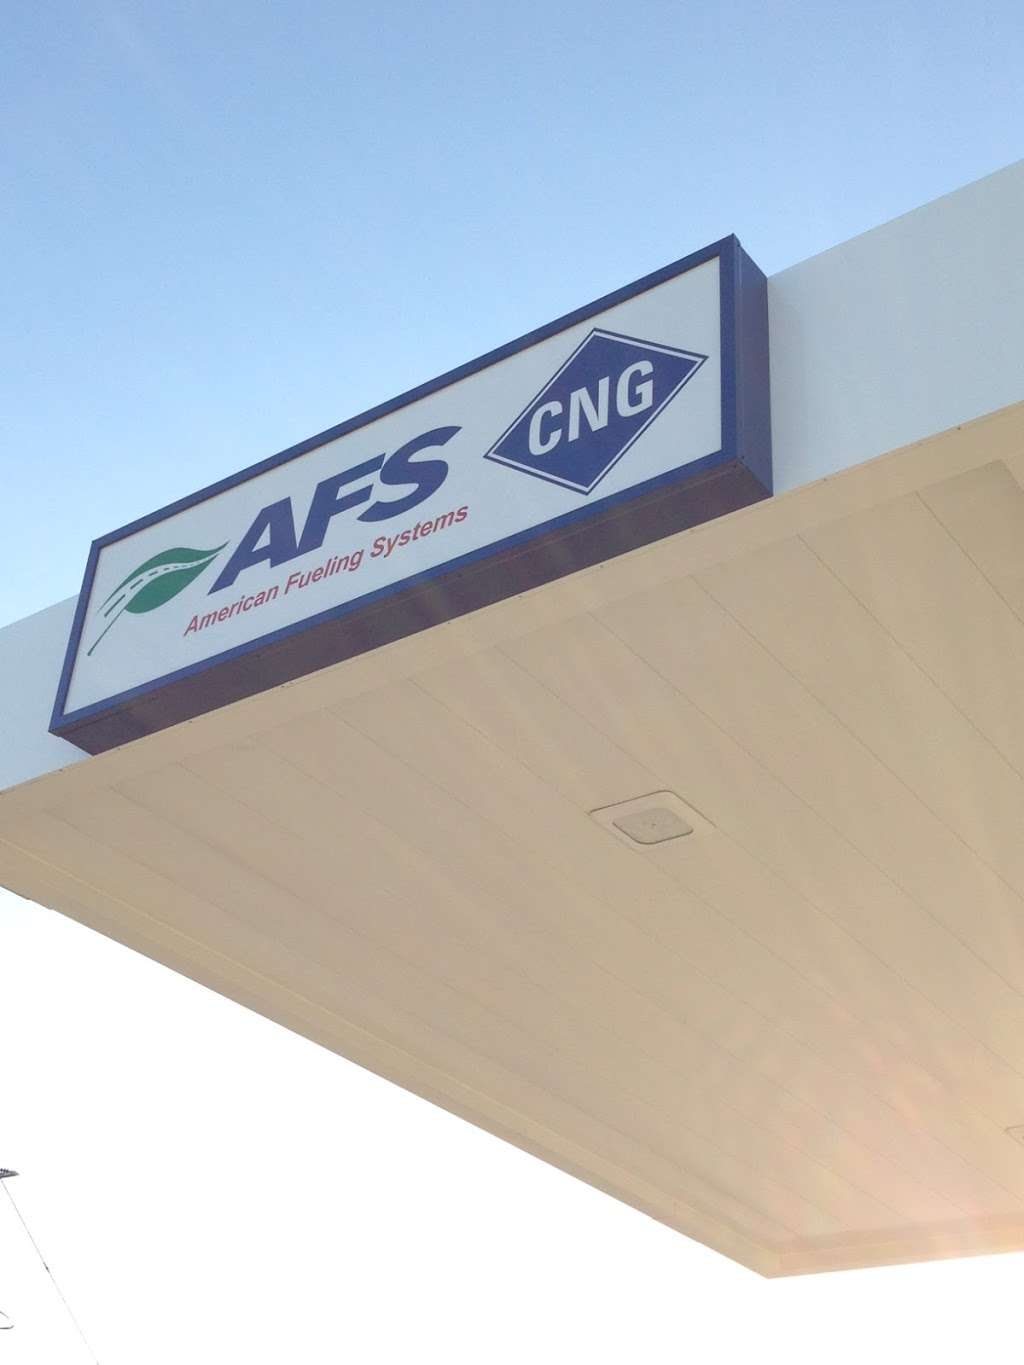 American Fueling Systems | 7530 E Orem Dr, Houston, TX 77075 | Phone: (770) 399-7800